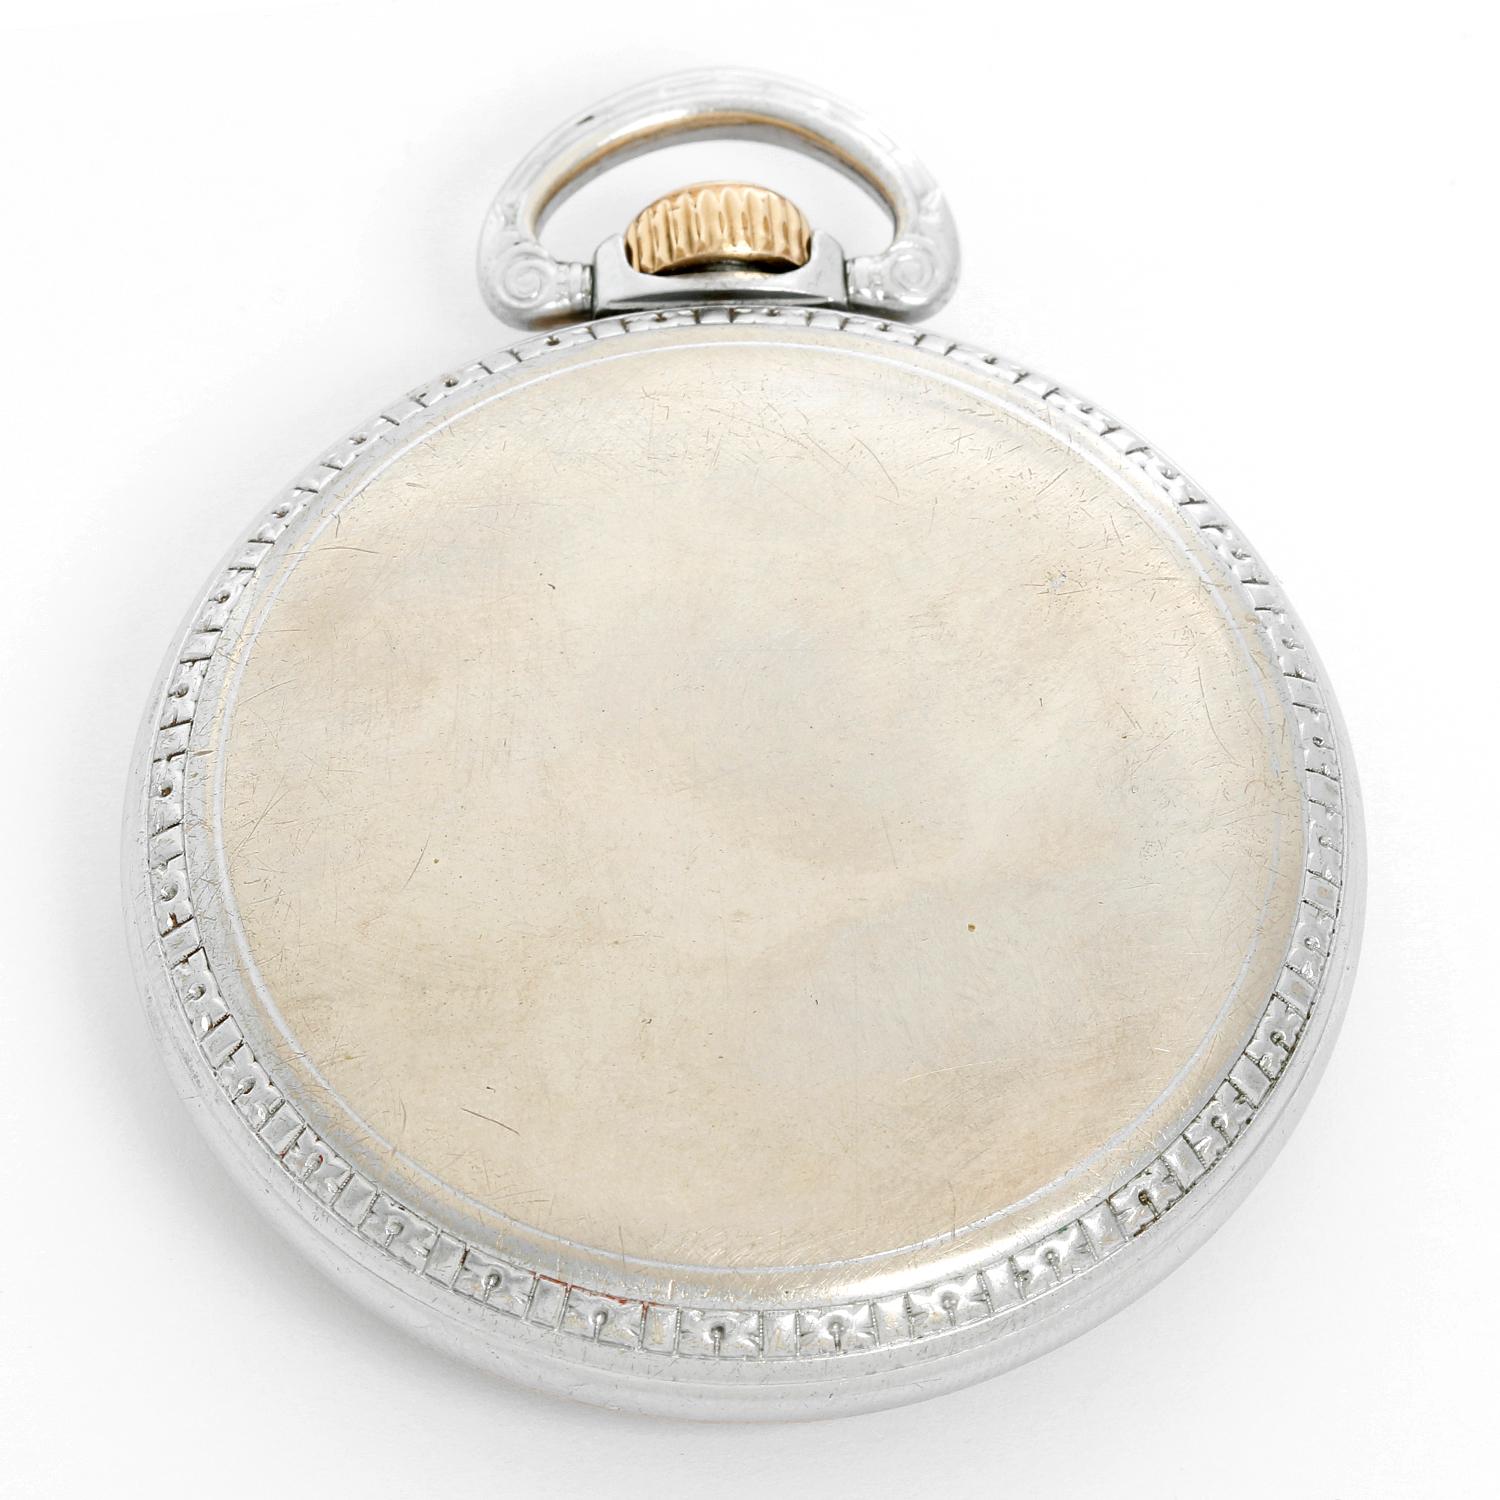 Elgin  571 BW Pocket Watch - Manual; 21 jewels . Steel case ( 50 mm ). White enamel Elgin double sunk Montgomery dial, features ornate black Arabic hour numerals and block minute numerals. Pre-owned with custom box. 